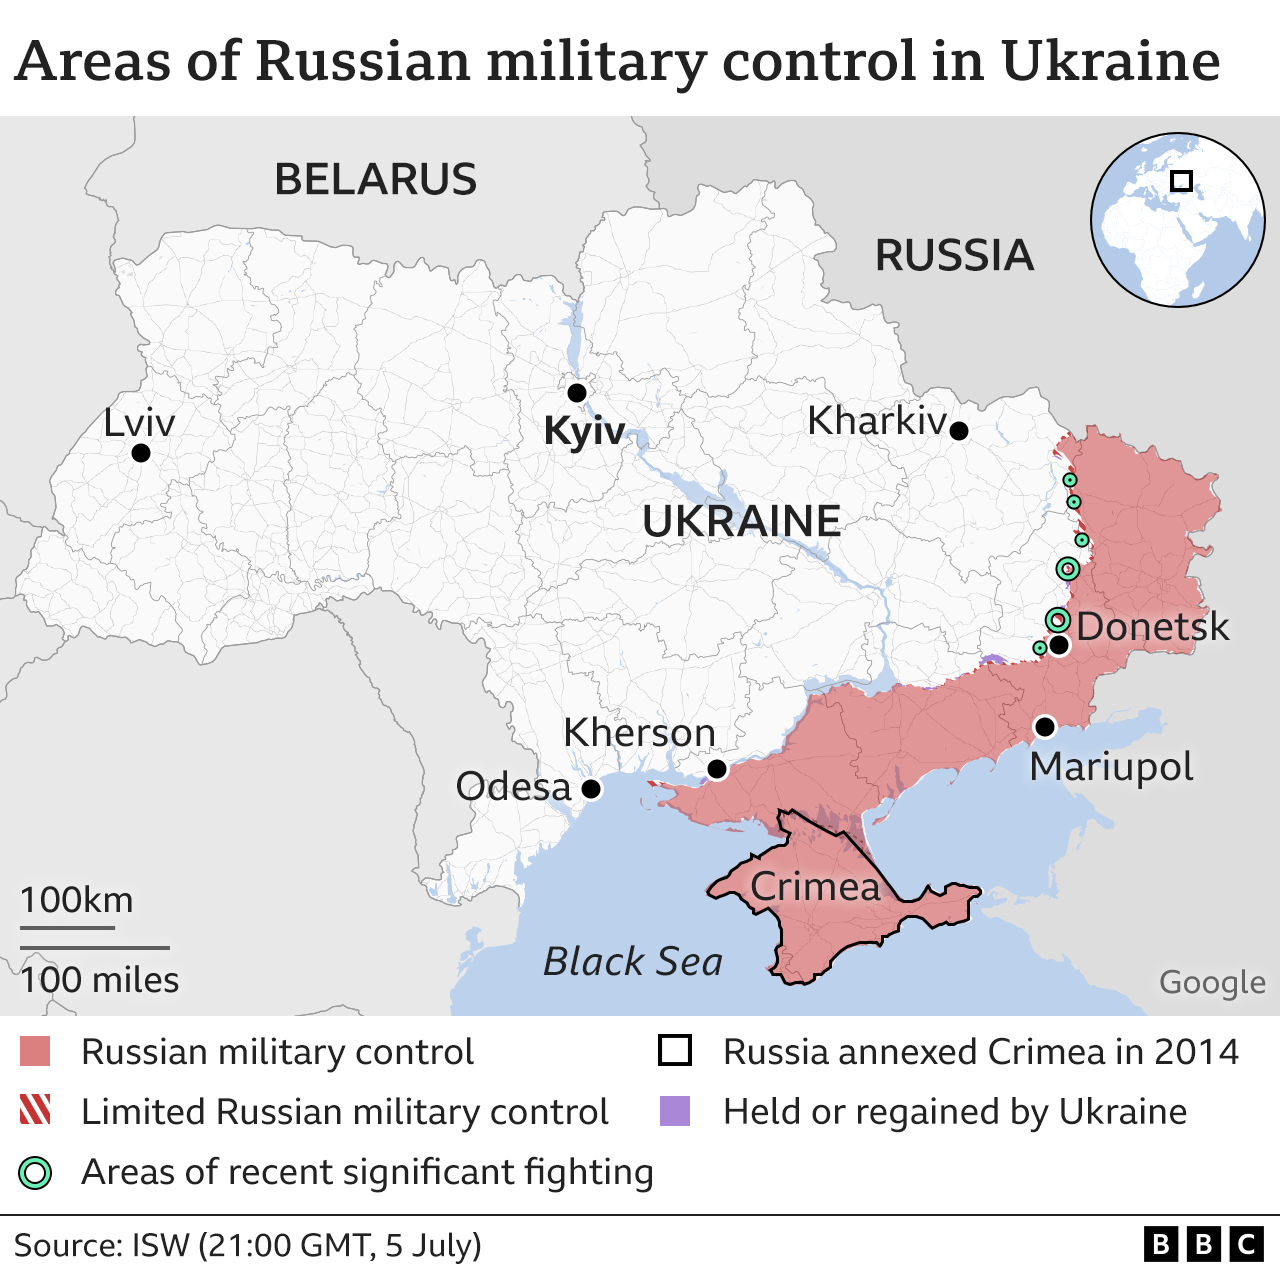 Map showing the whole of Ukraine and the areas of significant recent fighting